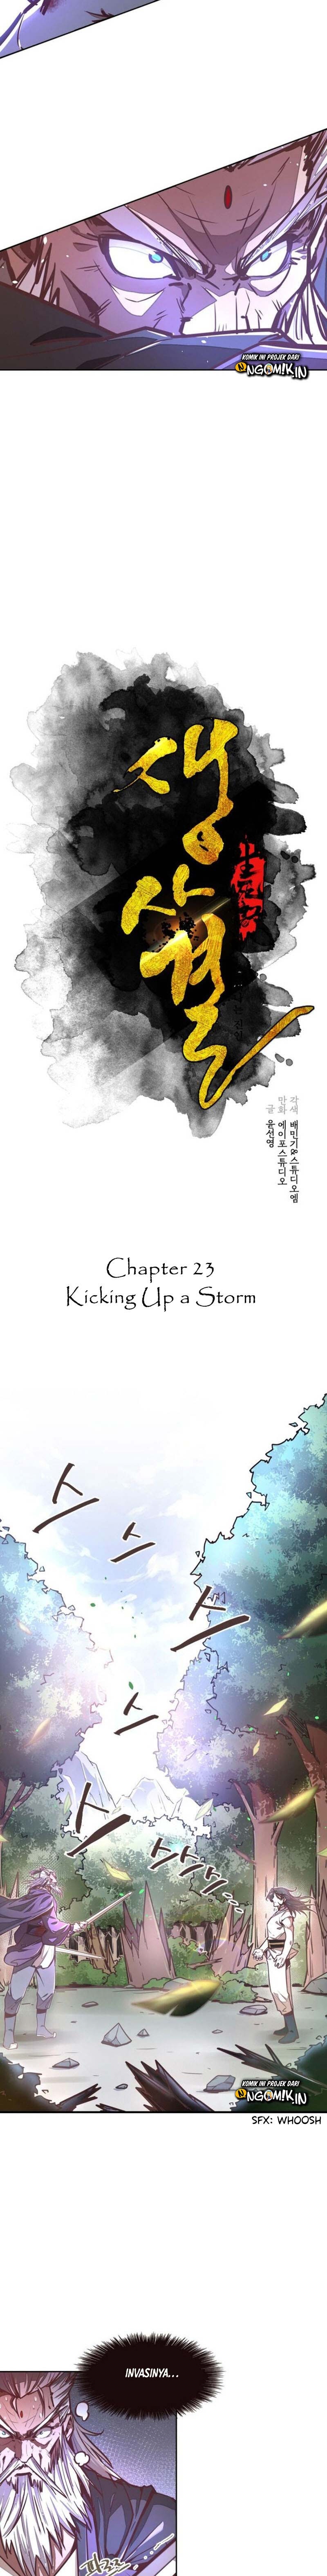 Life and Death: The Awakening Chapter 23